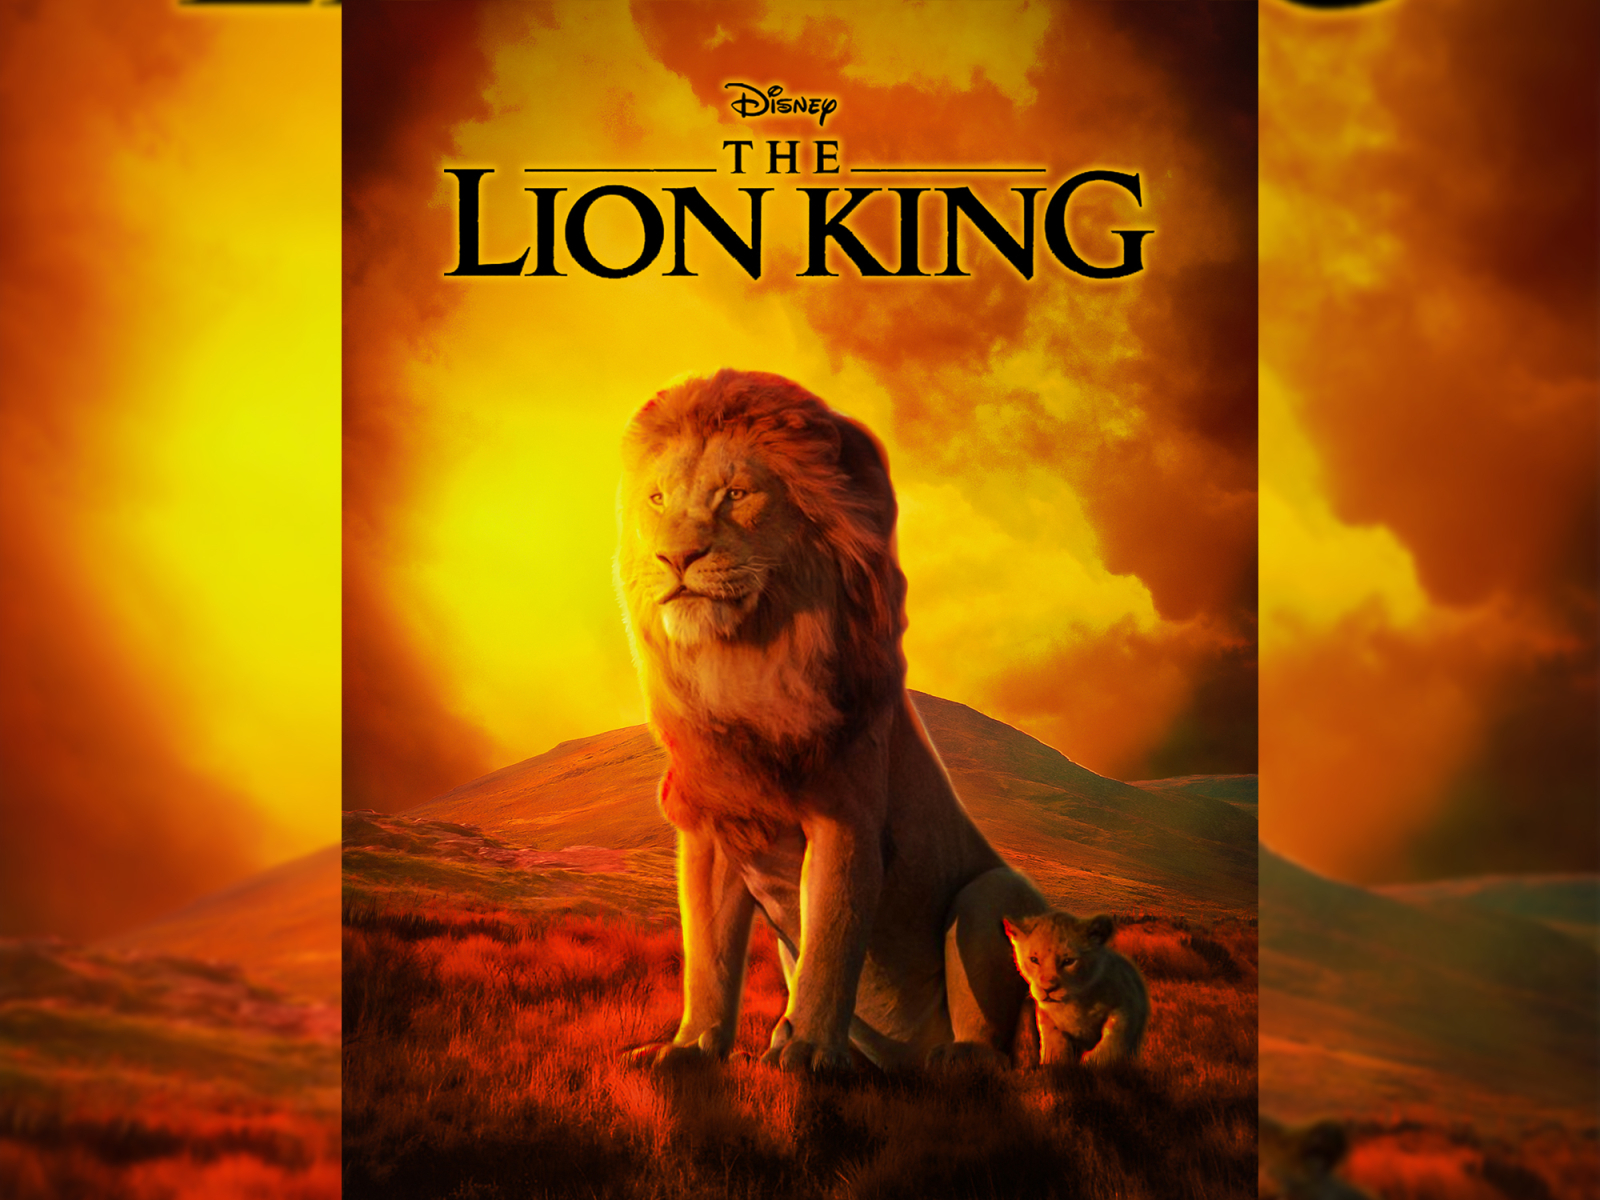 Lion King Movie poster - Photoshop Artwork by Faisal Arefin Abid on ...